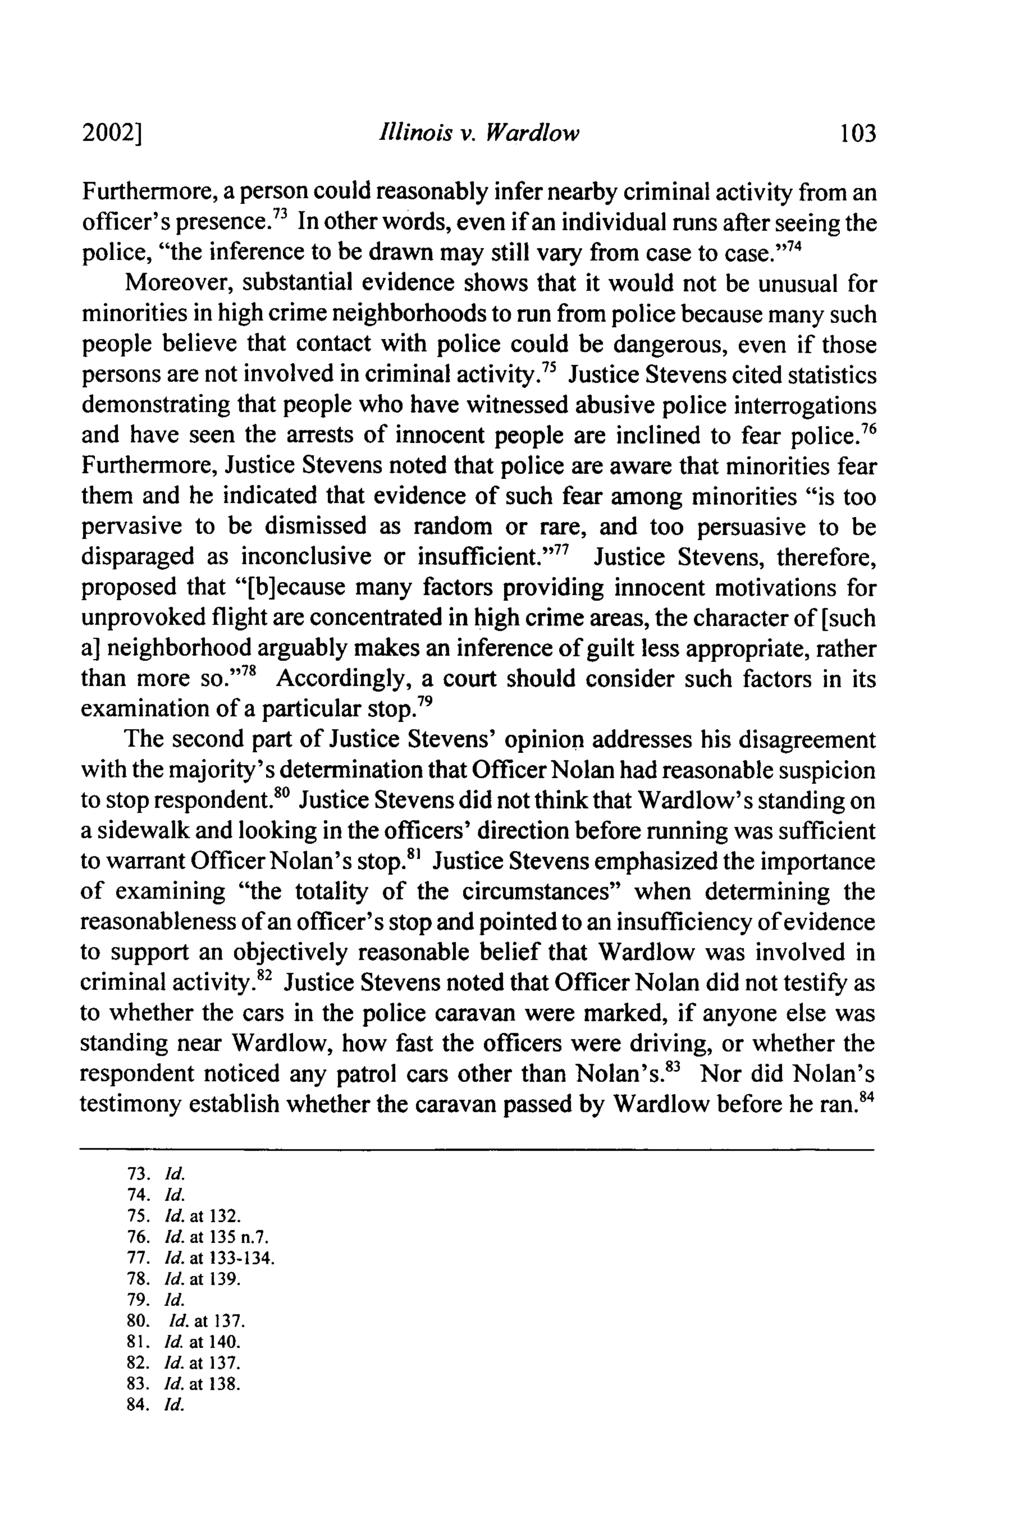 2002] Illinois v. Wardlow Furthermore, a person could reasonably infer nearby criminal activity from an officer's presence.